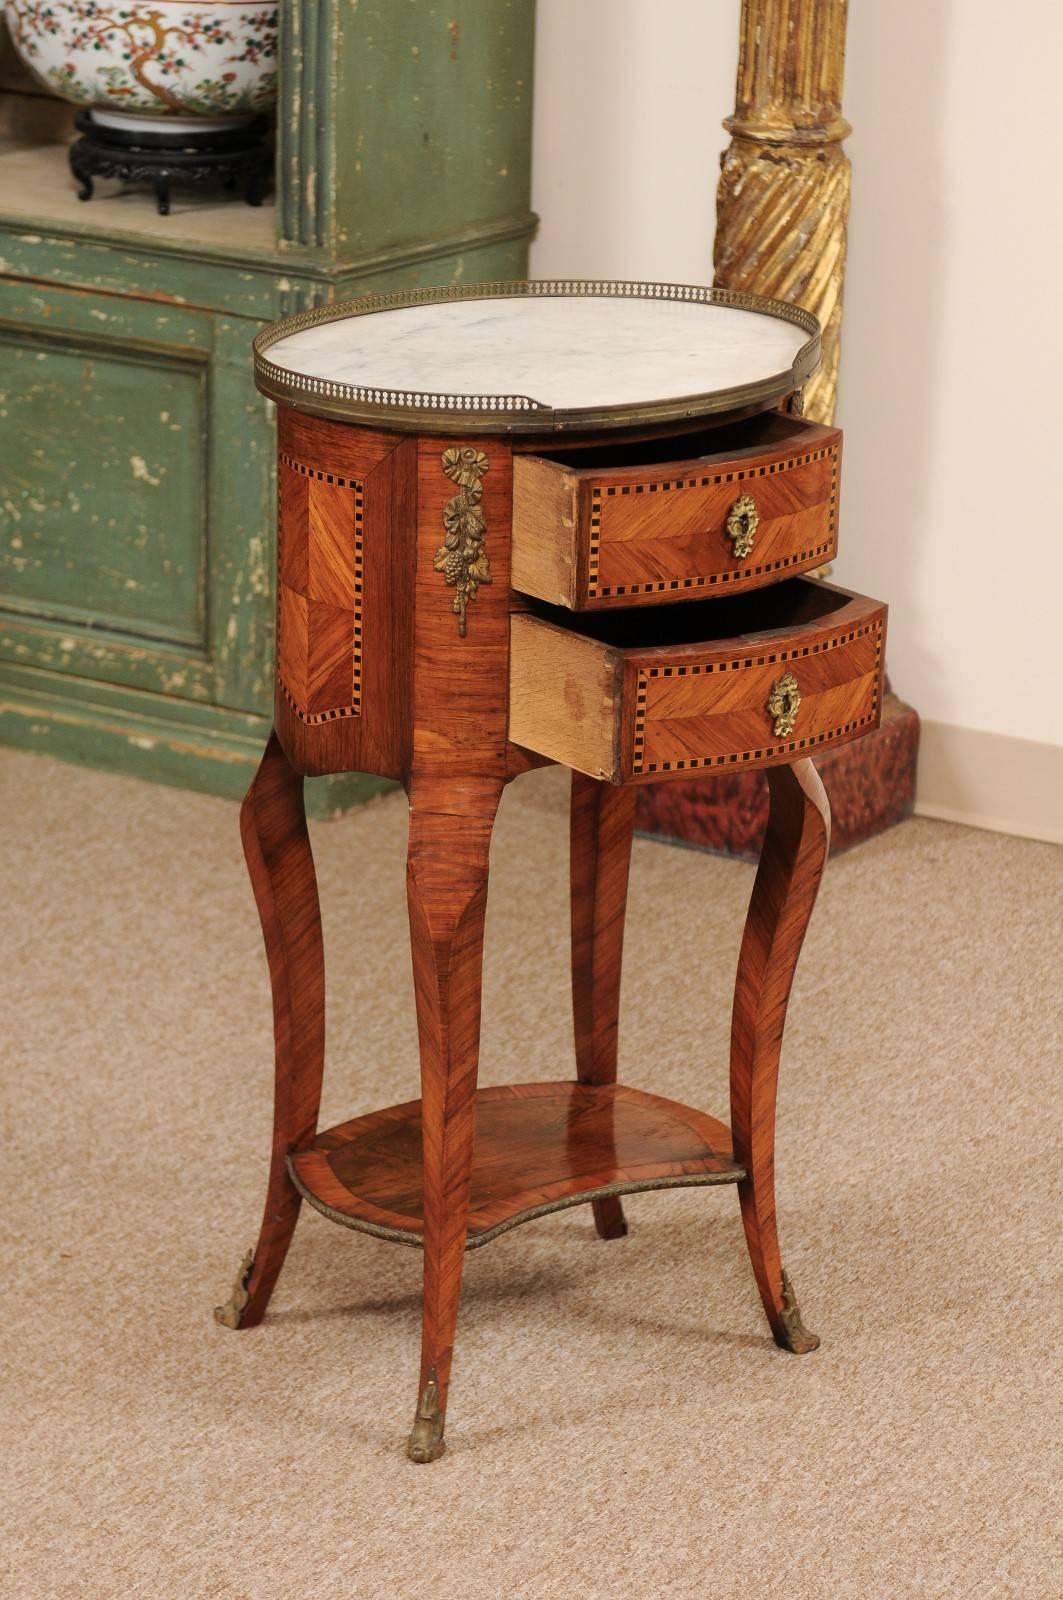 19th Century French Inlaid Tulipwood Chevet with Oval White Marble Top For Sale 1